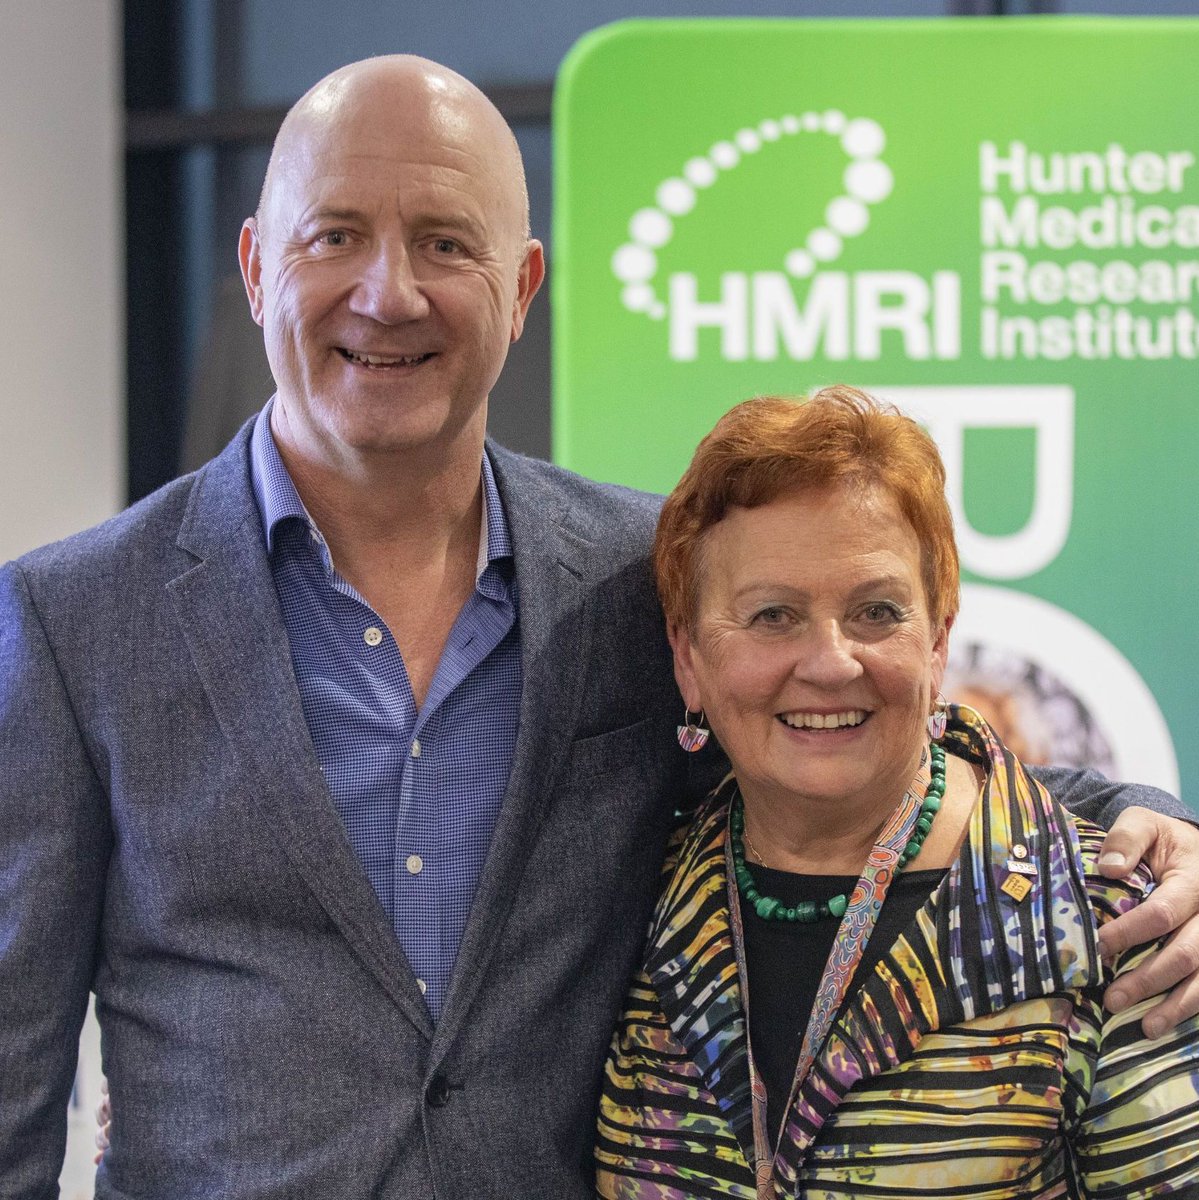 This week we celebrated the retirement of HMRI's very 1st employee - Libby Rodgers-McPhee. Libby has been responsible for not only securing millions of dollars of philanthropic funding to support #medicalresearch, but has helped build HMRI to what it is today. All the best Lib!